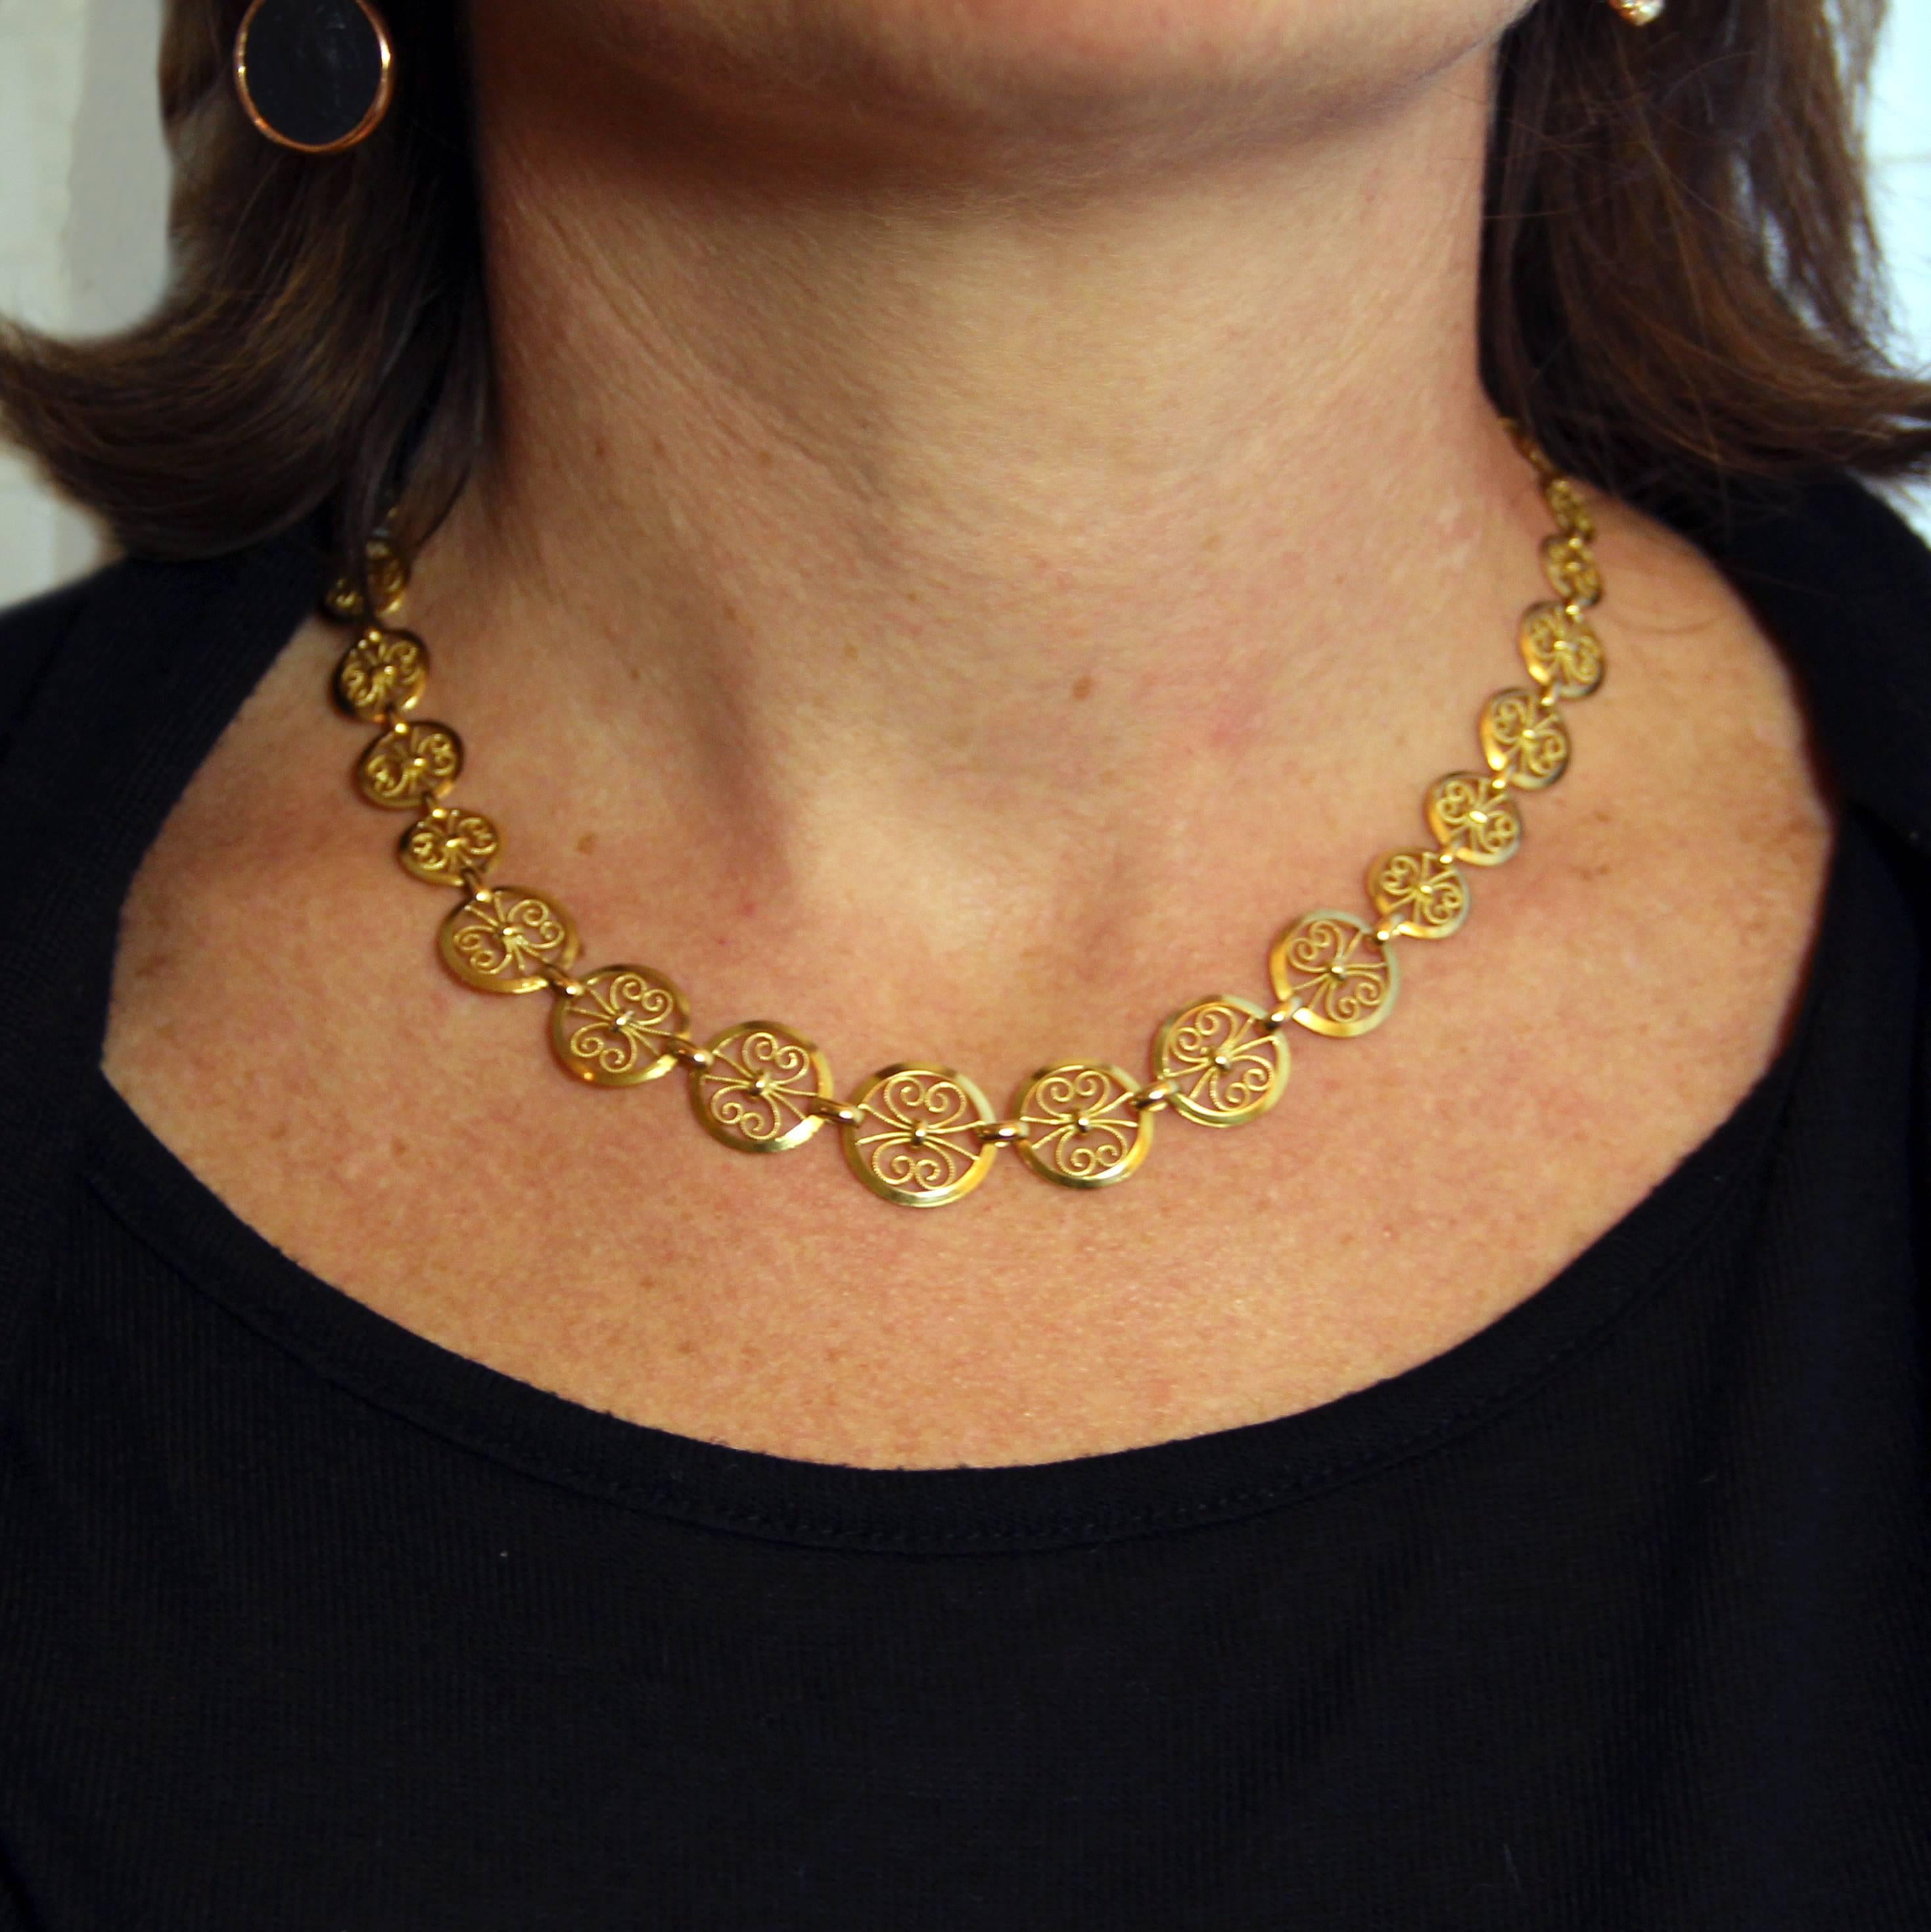 Necklace in 18 carats yellow gold.
Lovely choker necklace, it consists of a drop of round motifs openwork filigree and separated from each other by rings of gold. The clasp is a spring ring.
Length: 43 cm, width at widest: 15.5 mm, thickness: 3.7